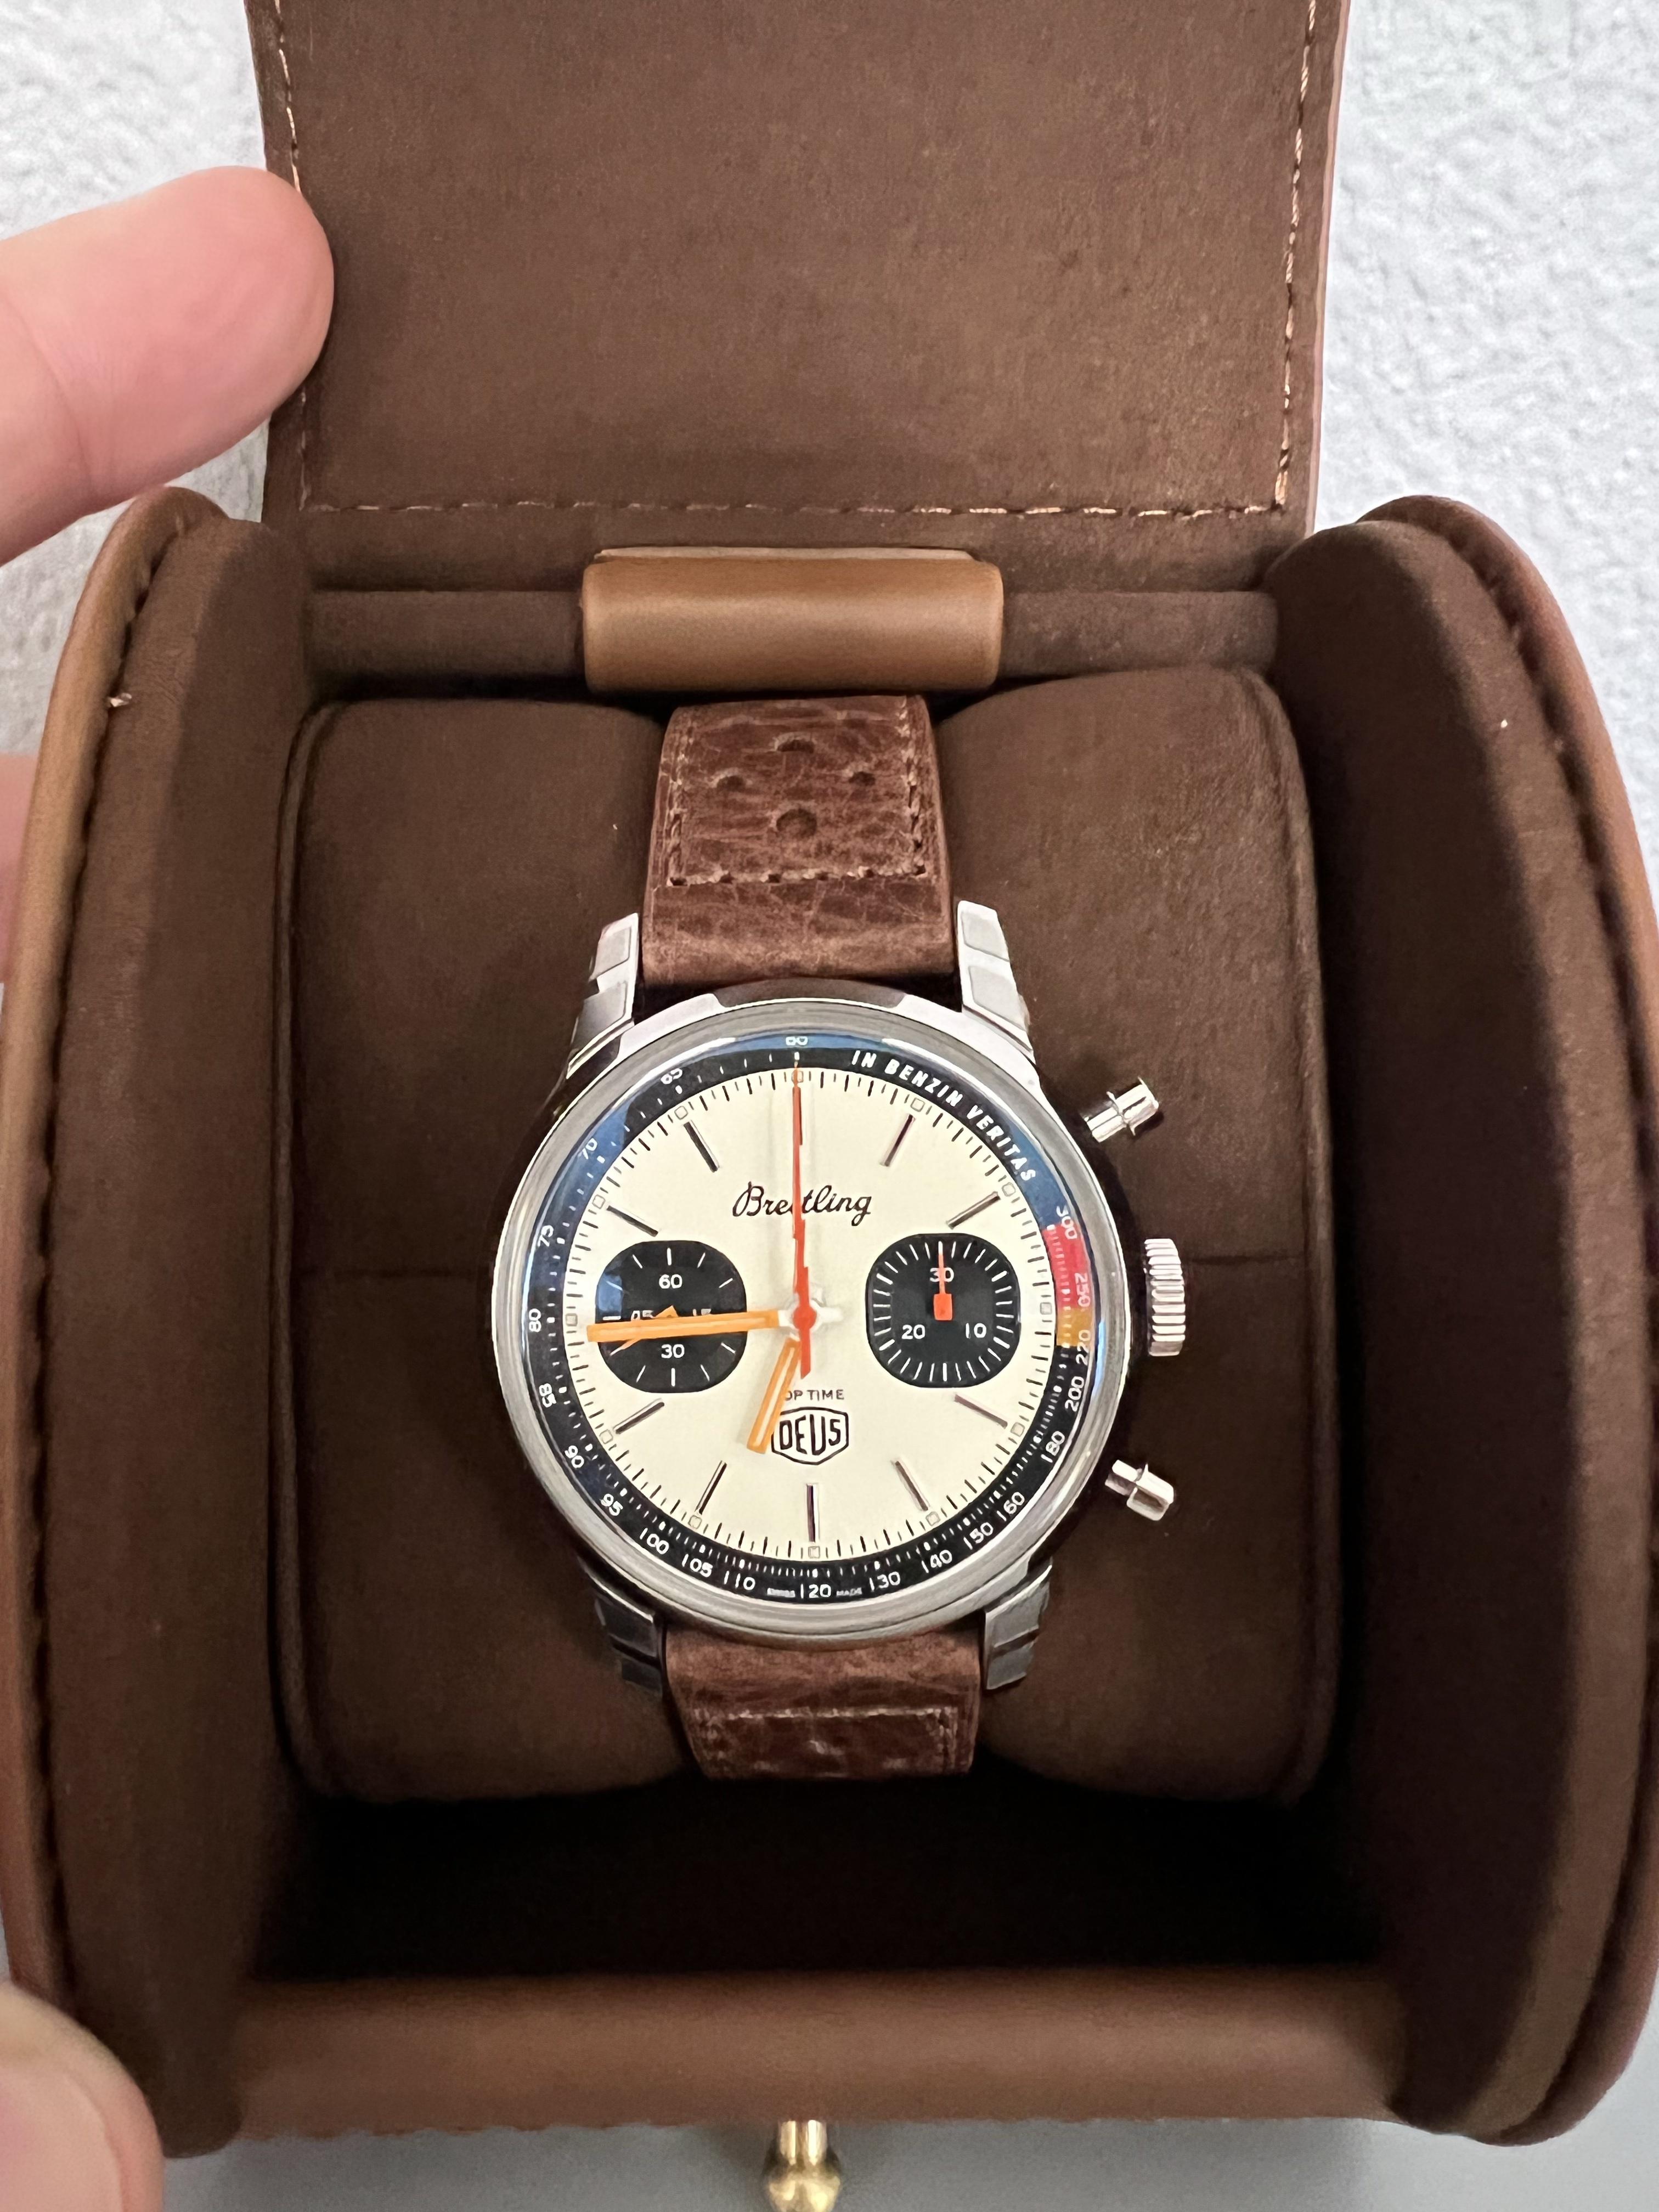 FS: Breitling TOP TIME DEUS Limited Edition